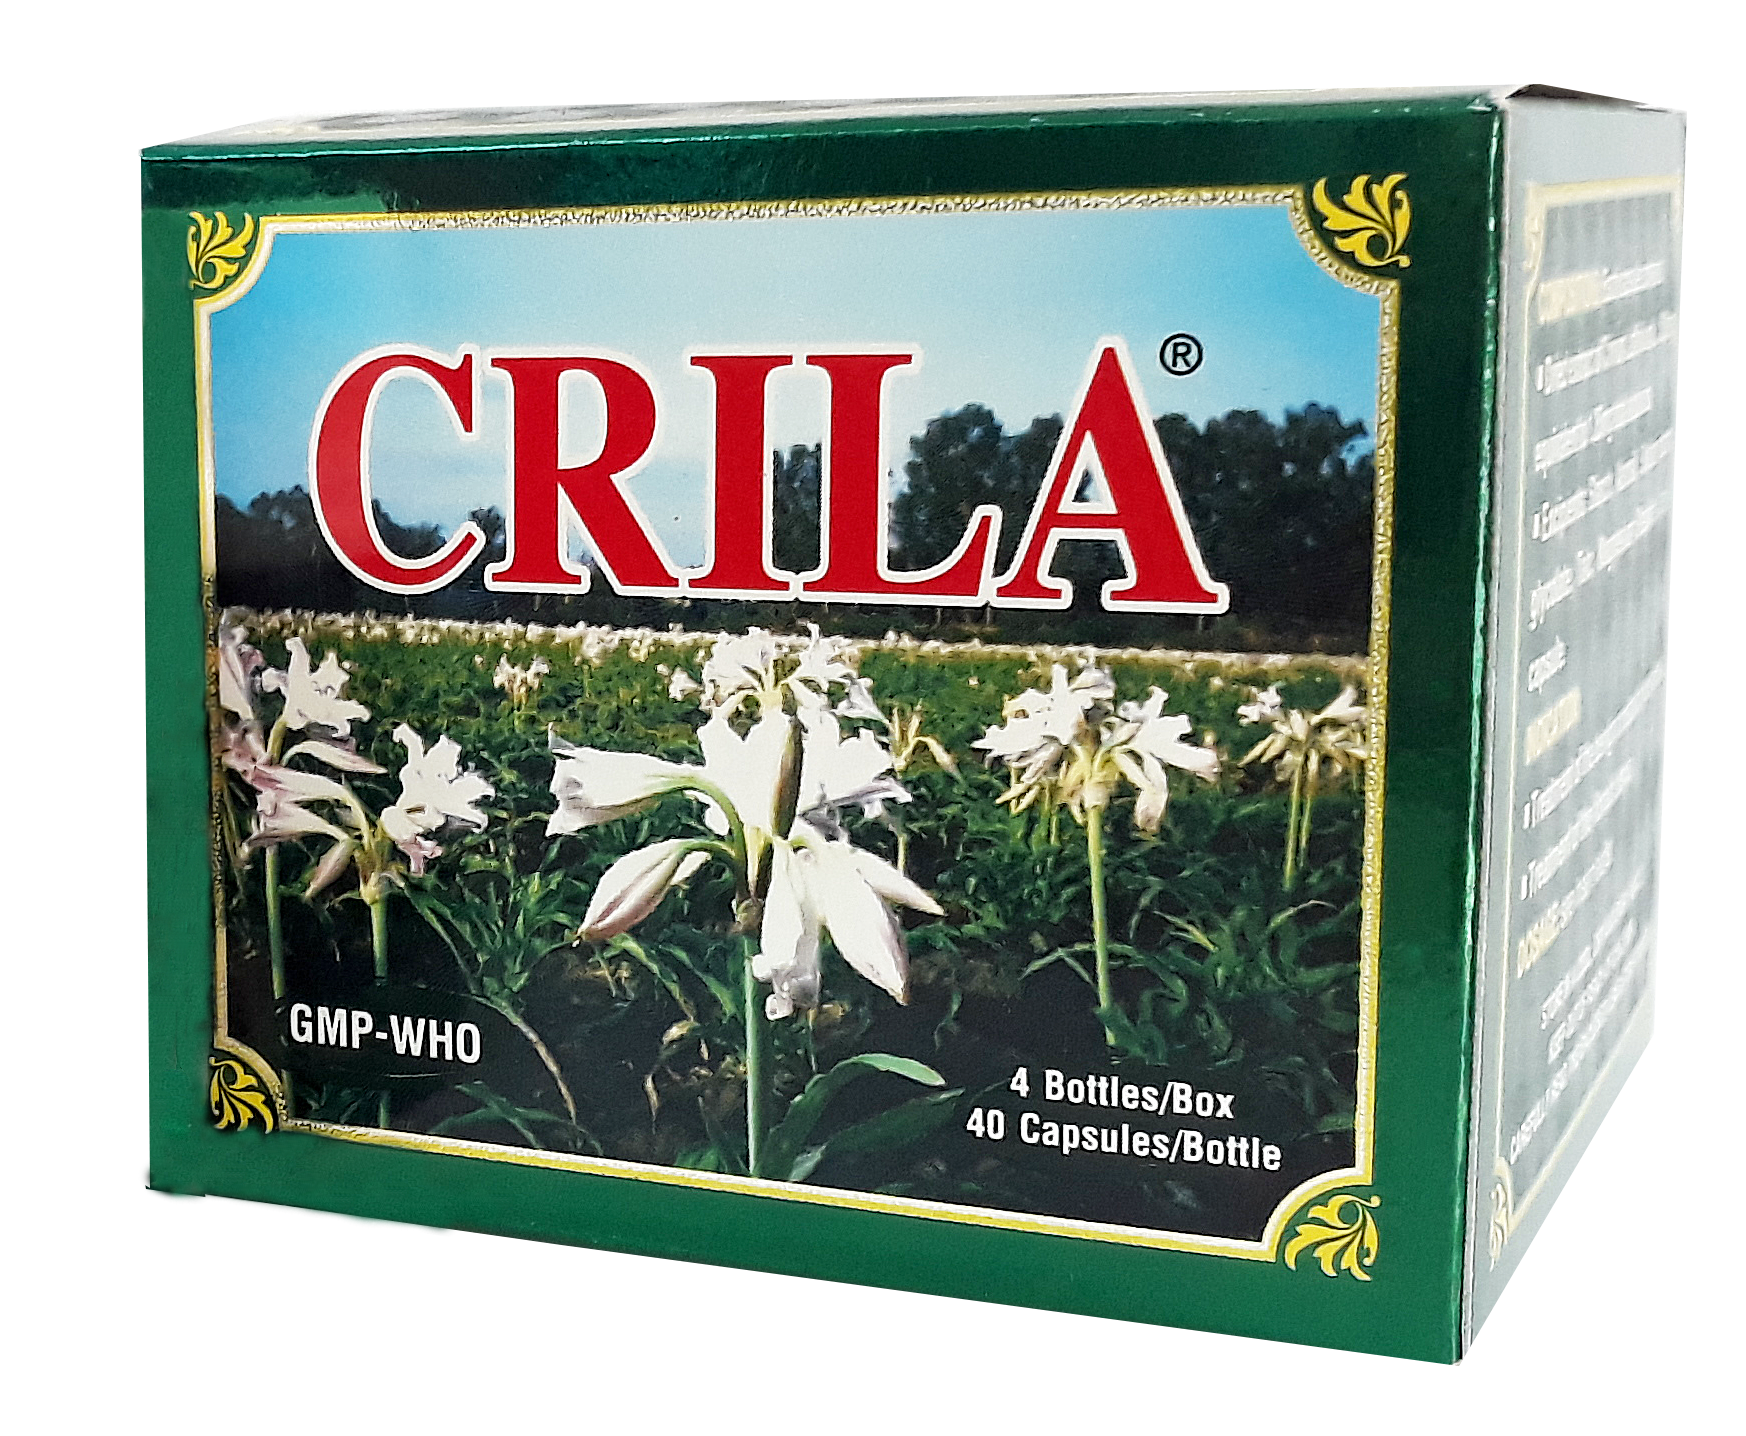 HOW TO DISTINGUISH THE FAKE CRILA FROM THE REAL ONE